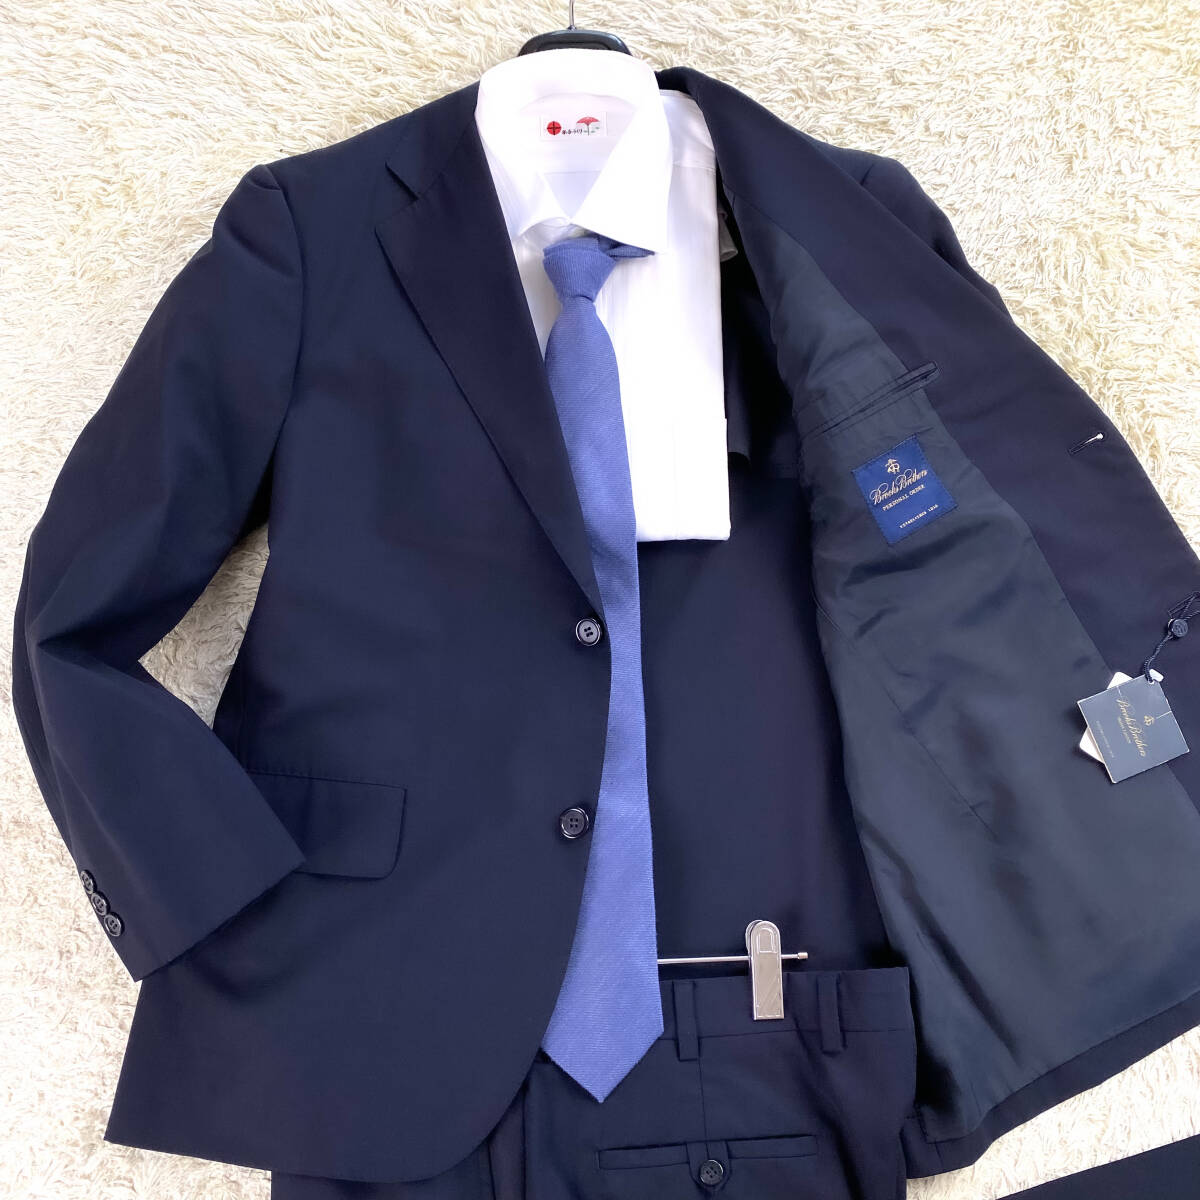  beautiful goods rare XL.LL~L!BROOKS BROTHERS setup suit wide design wide .. unlined in the back dark blue black navy 2 piece large . Brooks Brothers 